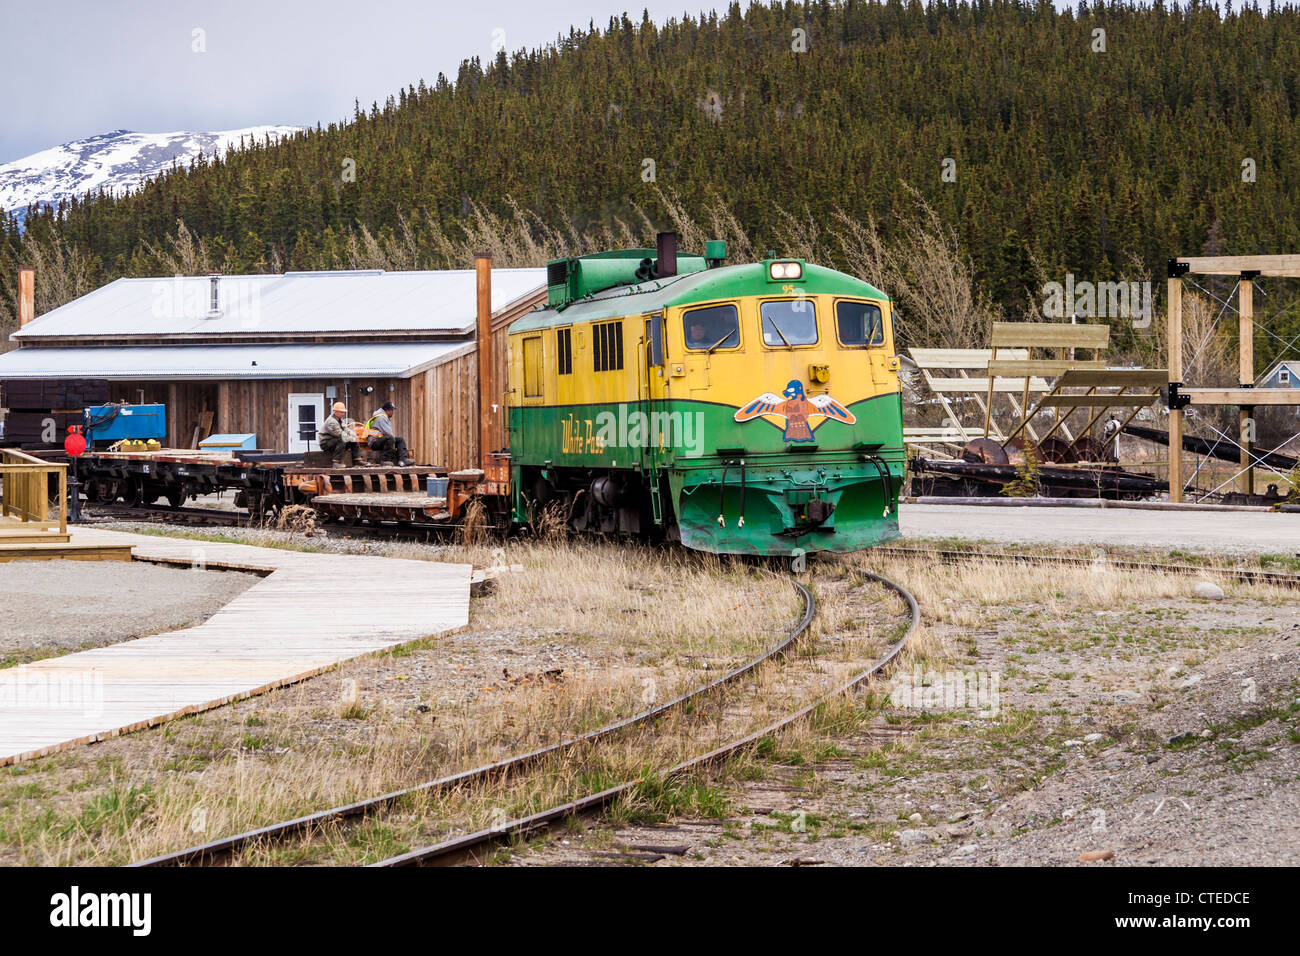 In Carcross, Yukon Territory, Canada, the White Pass (WP&YR) trains are working trains, pulling freight and cargo cars. Stock Photo